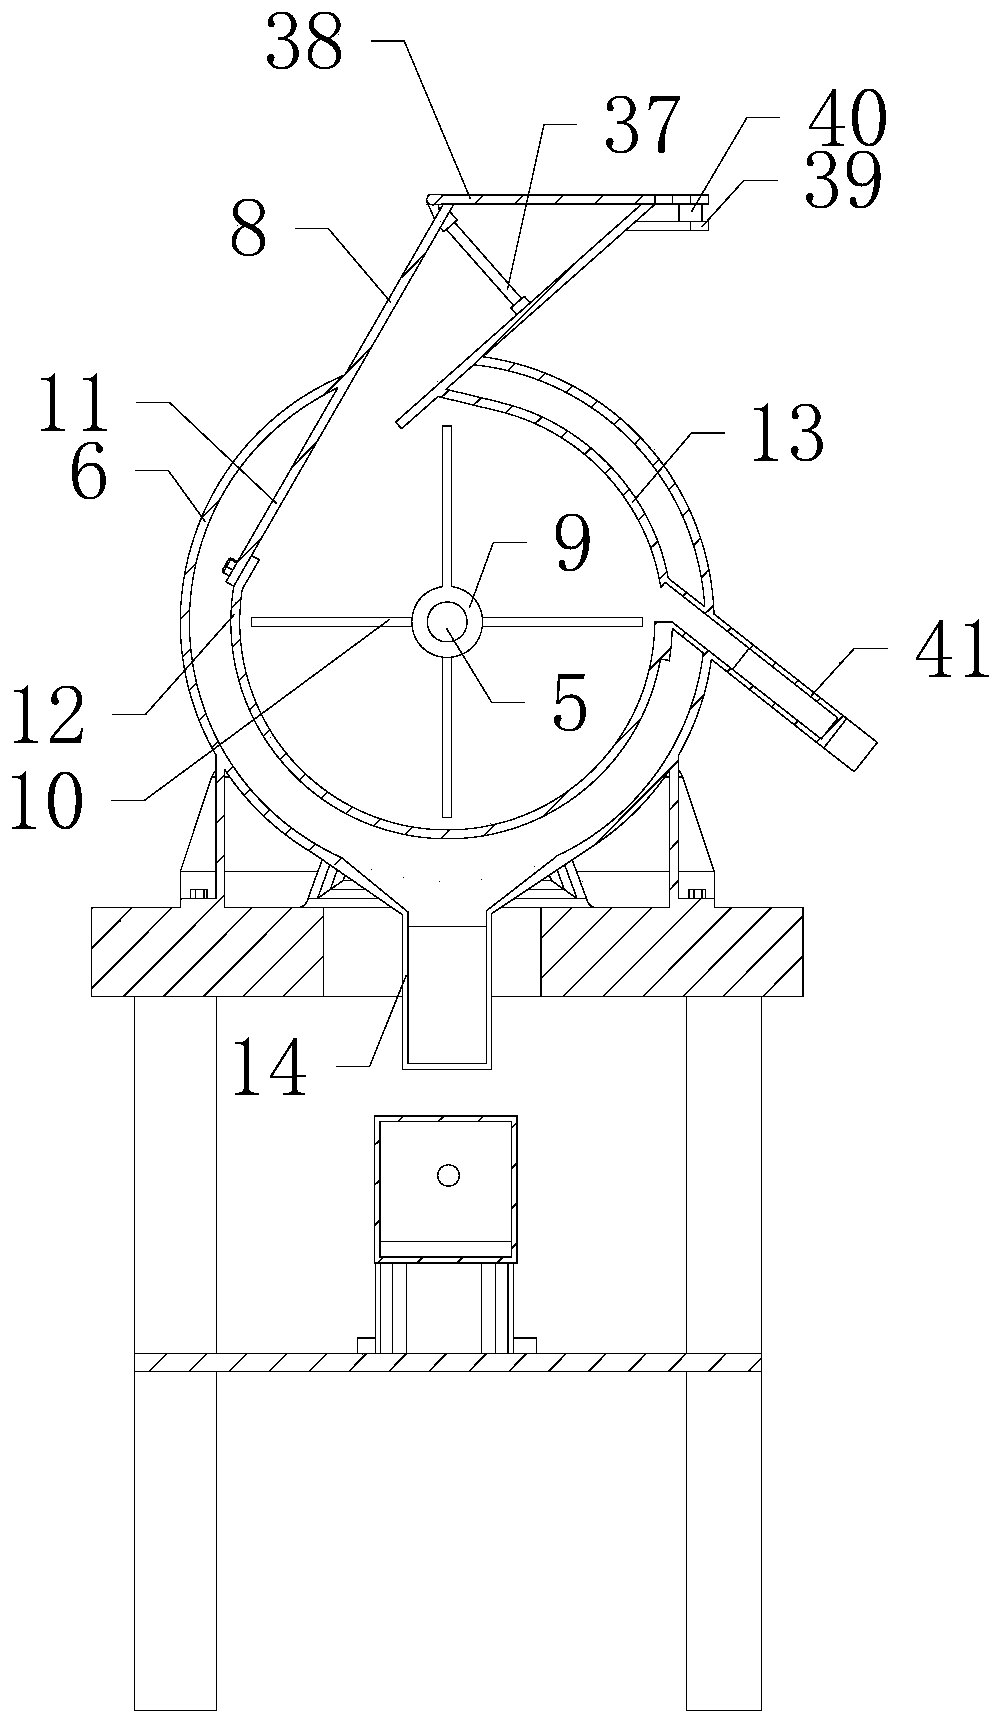 Water drop type crusher for livestock feed processing